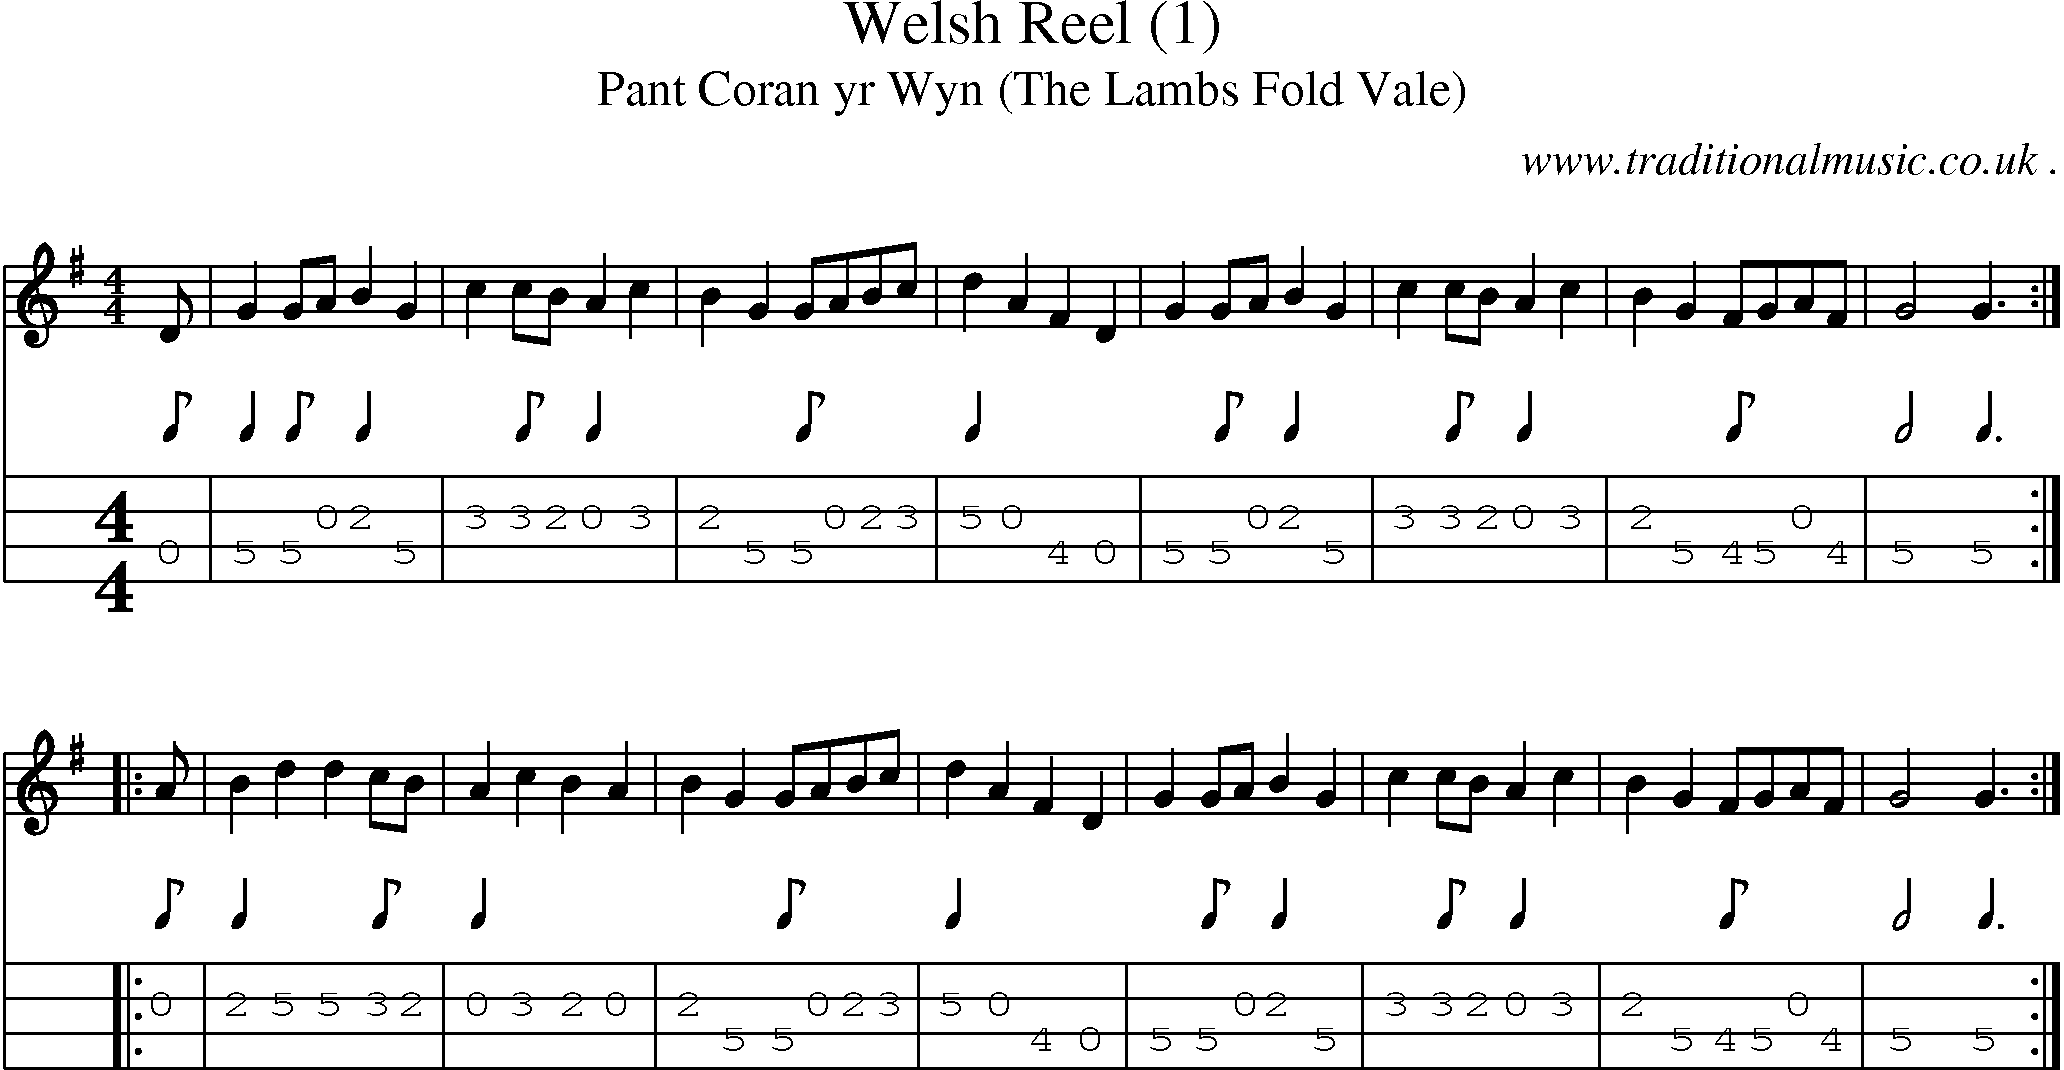 Sheet-Music and Mandolin Tabs for Welsh Reel (1)